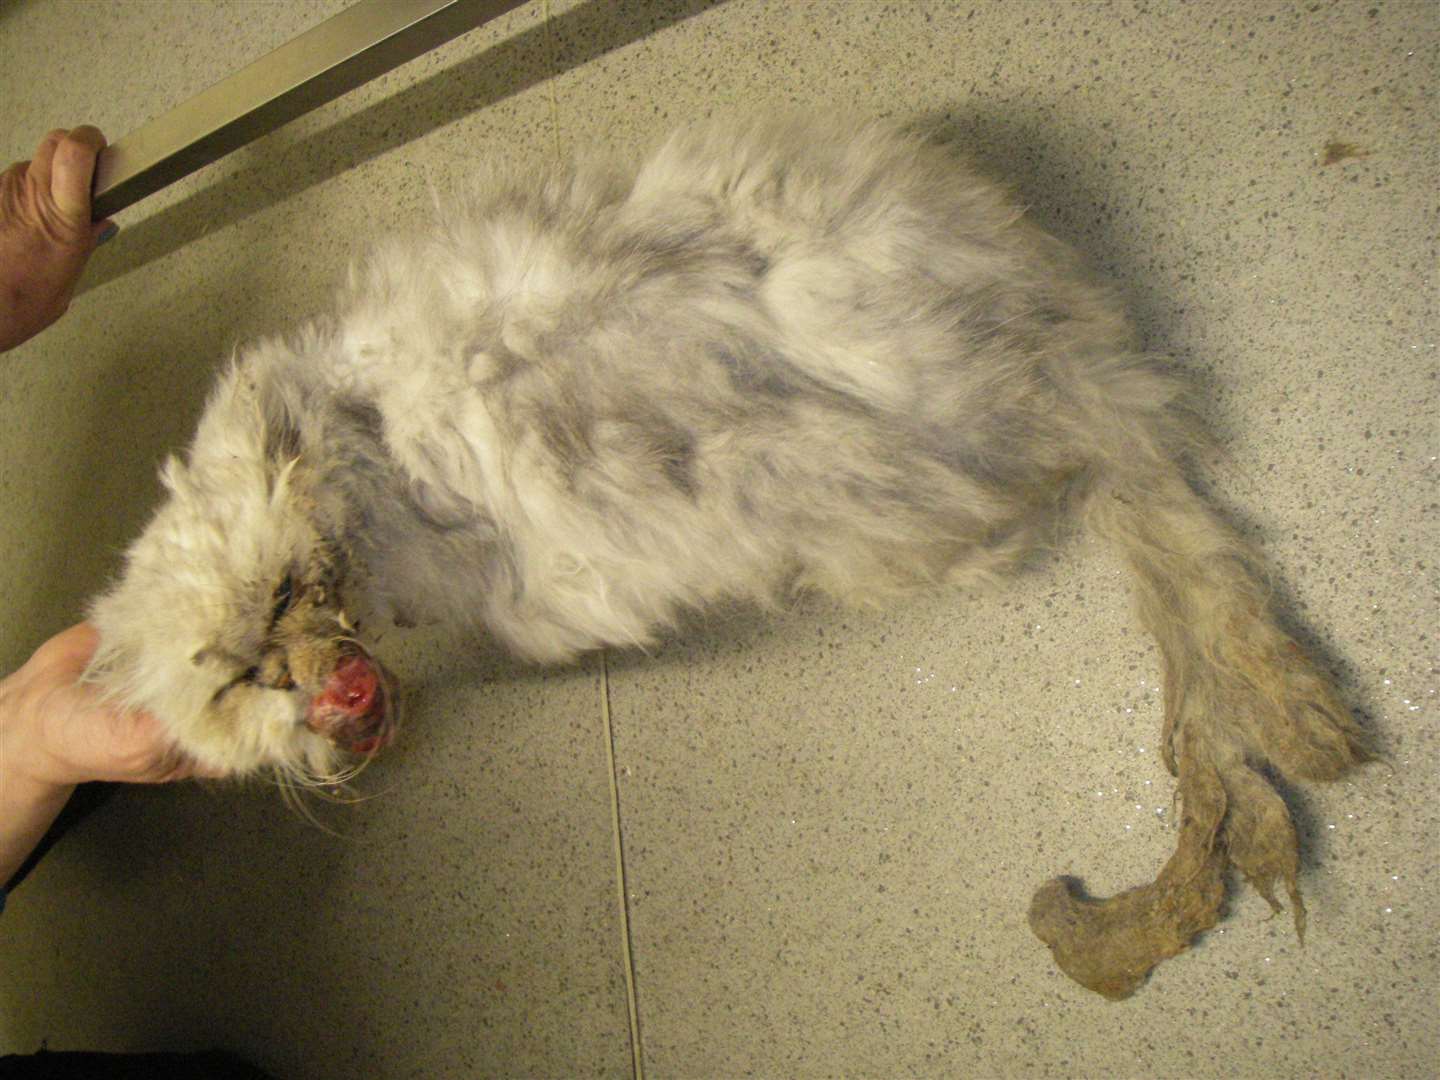 Misty was found with a growth on her mouth and matted fur